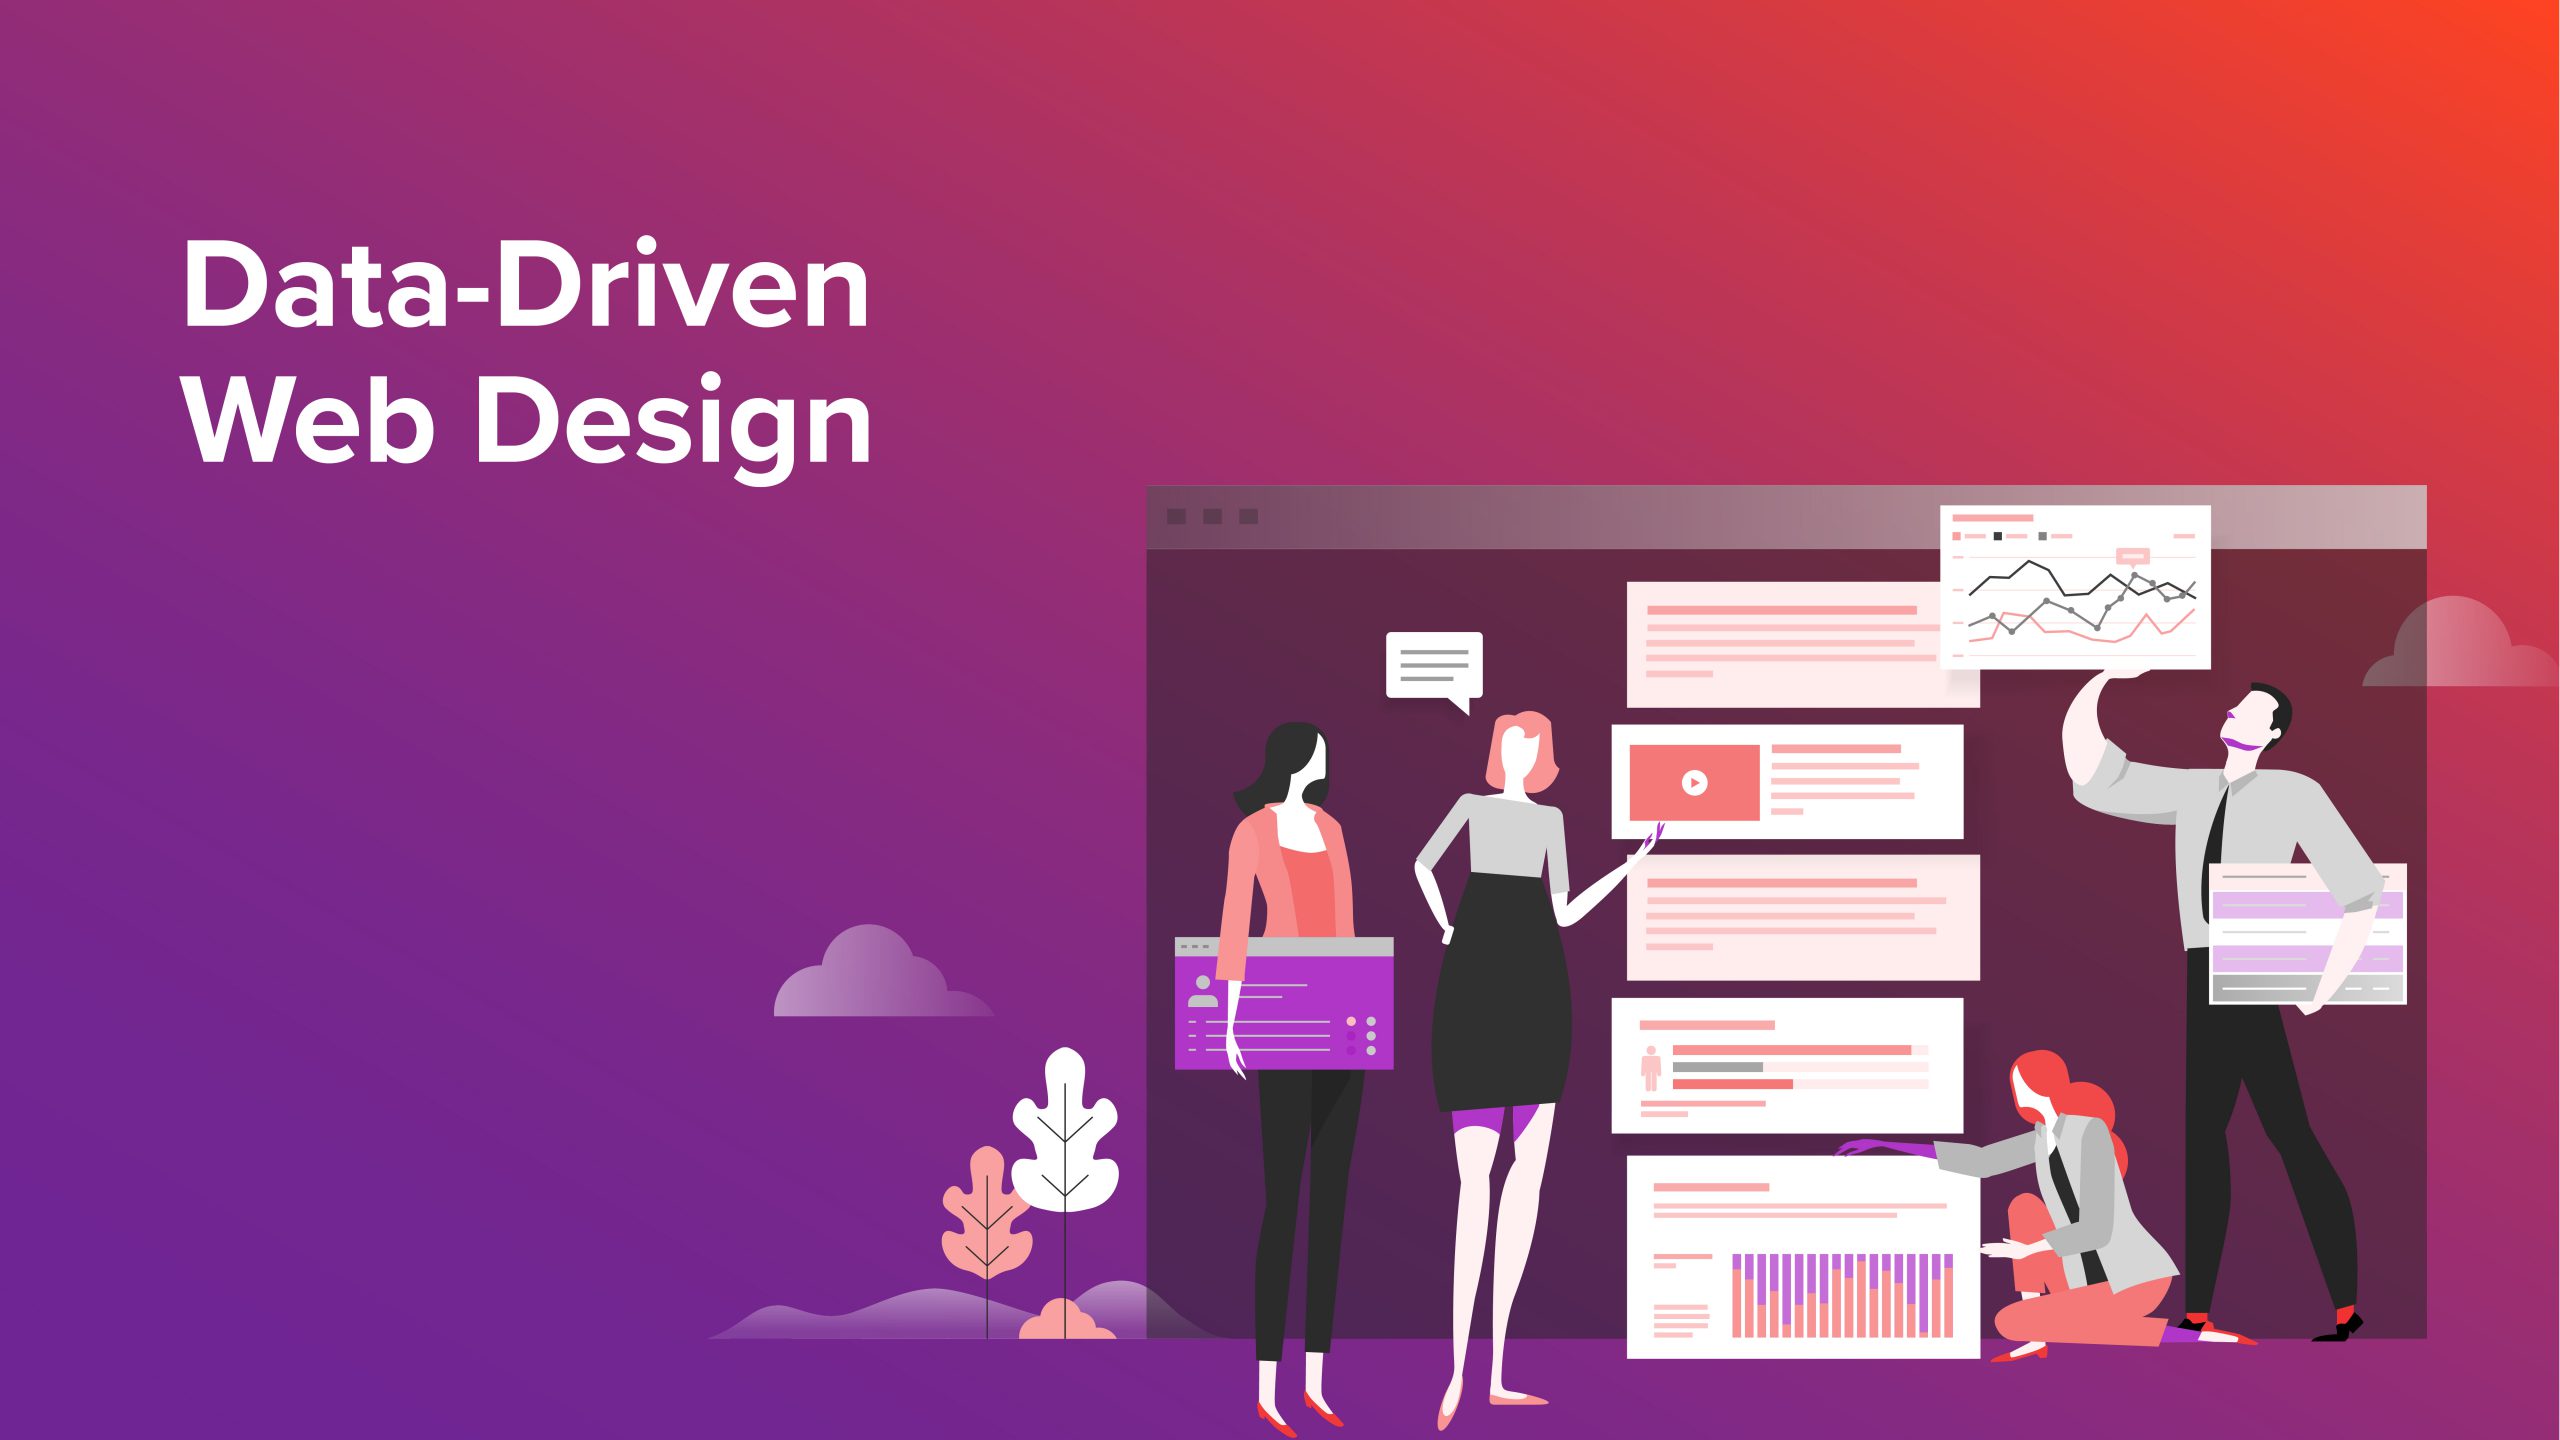 What is Data-Driven Web Design?